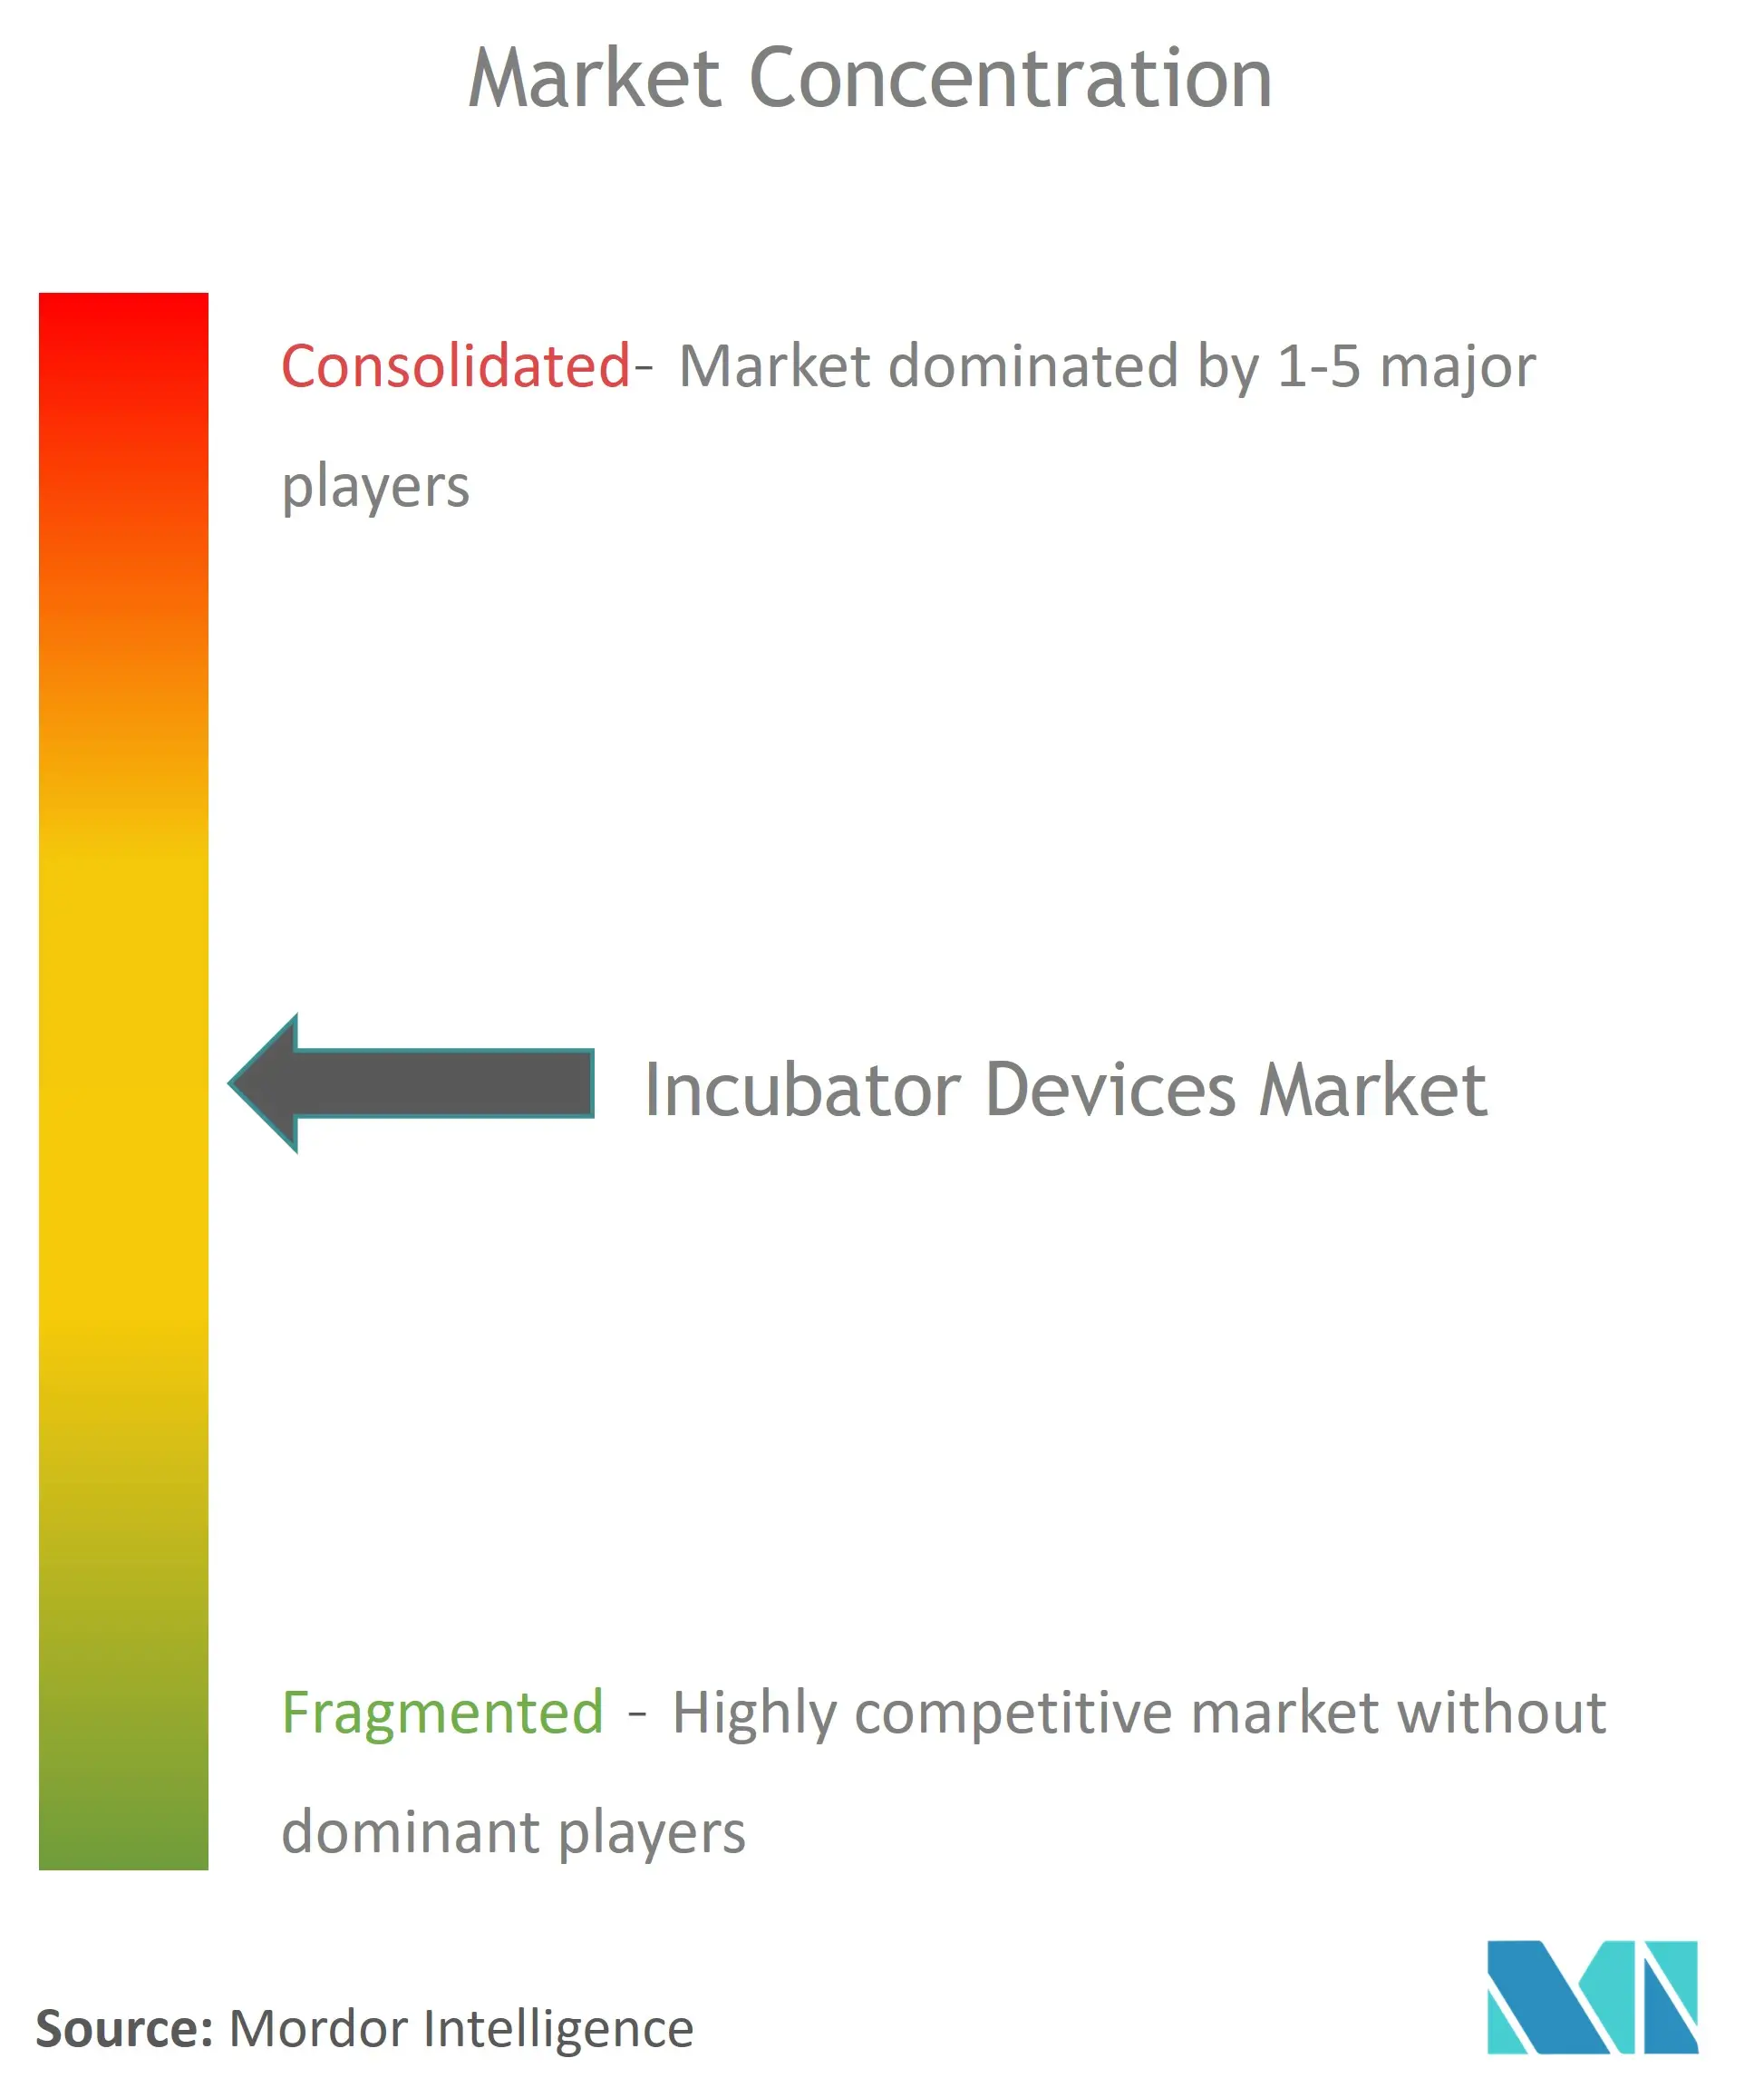 Incubator Devices Market Concentration